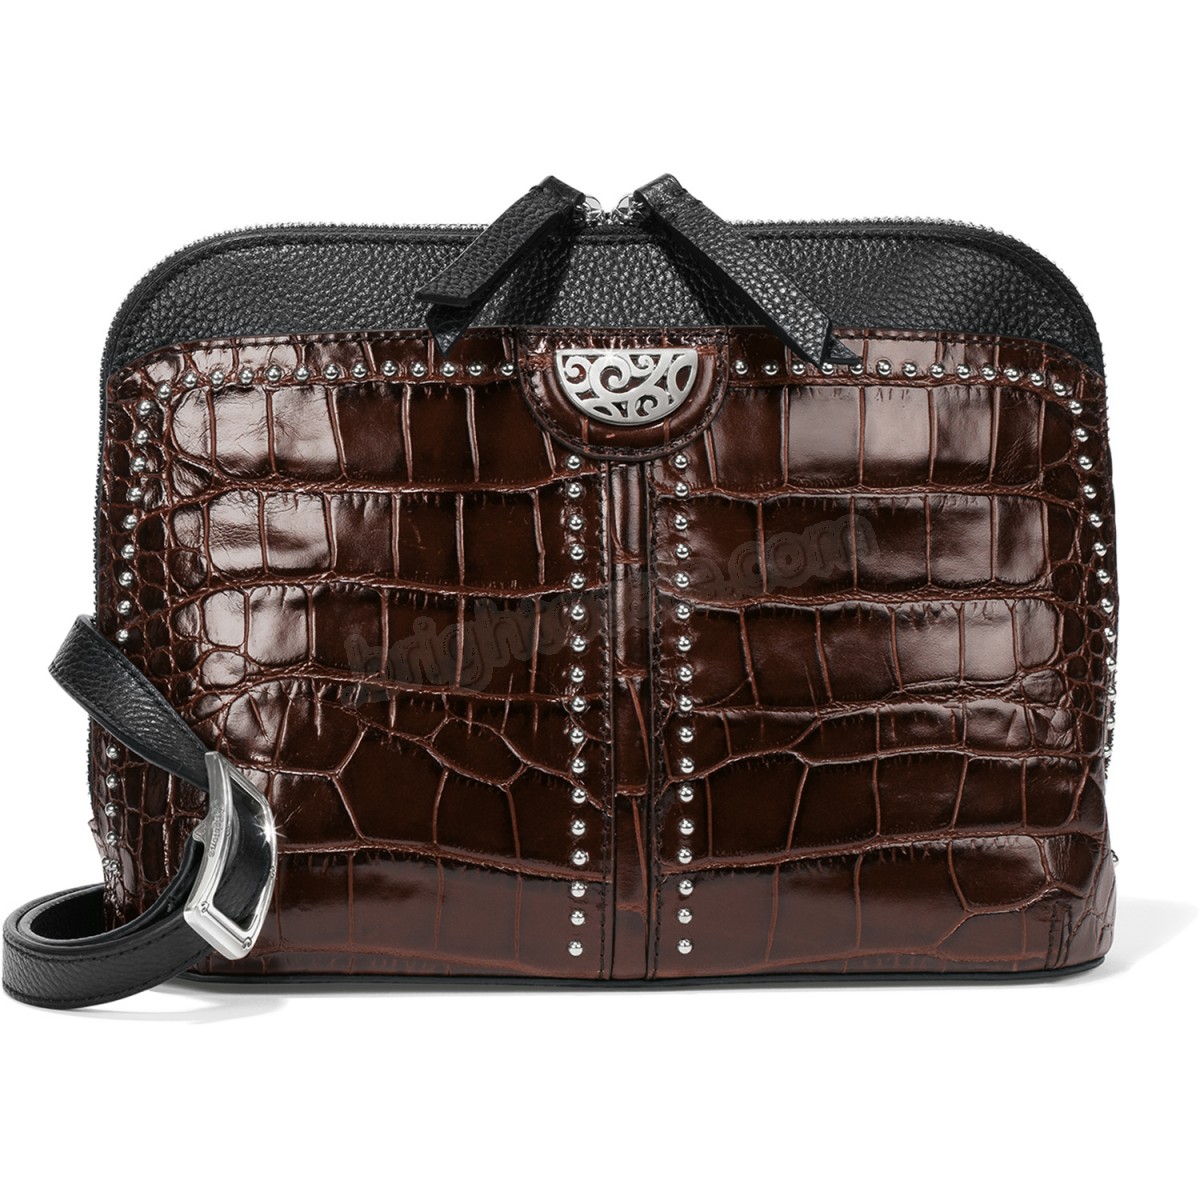 Brighton Collectibles & Online Discount Addy Convertible Cross Body - -4